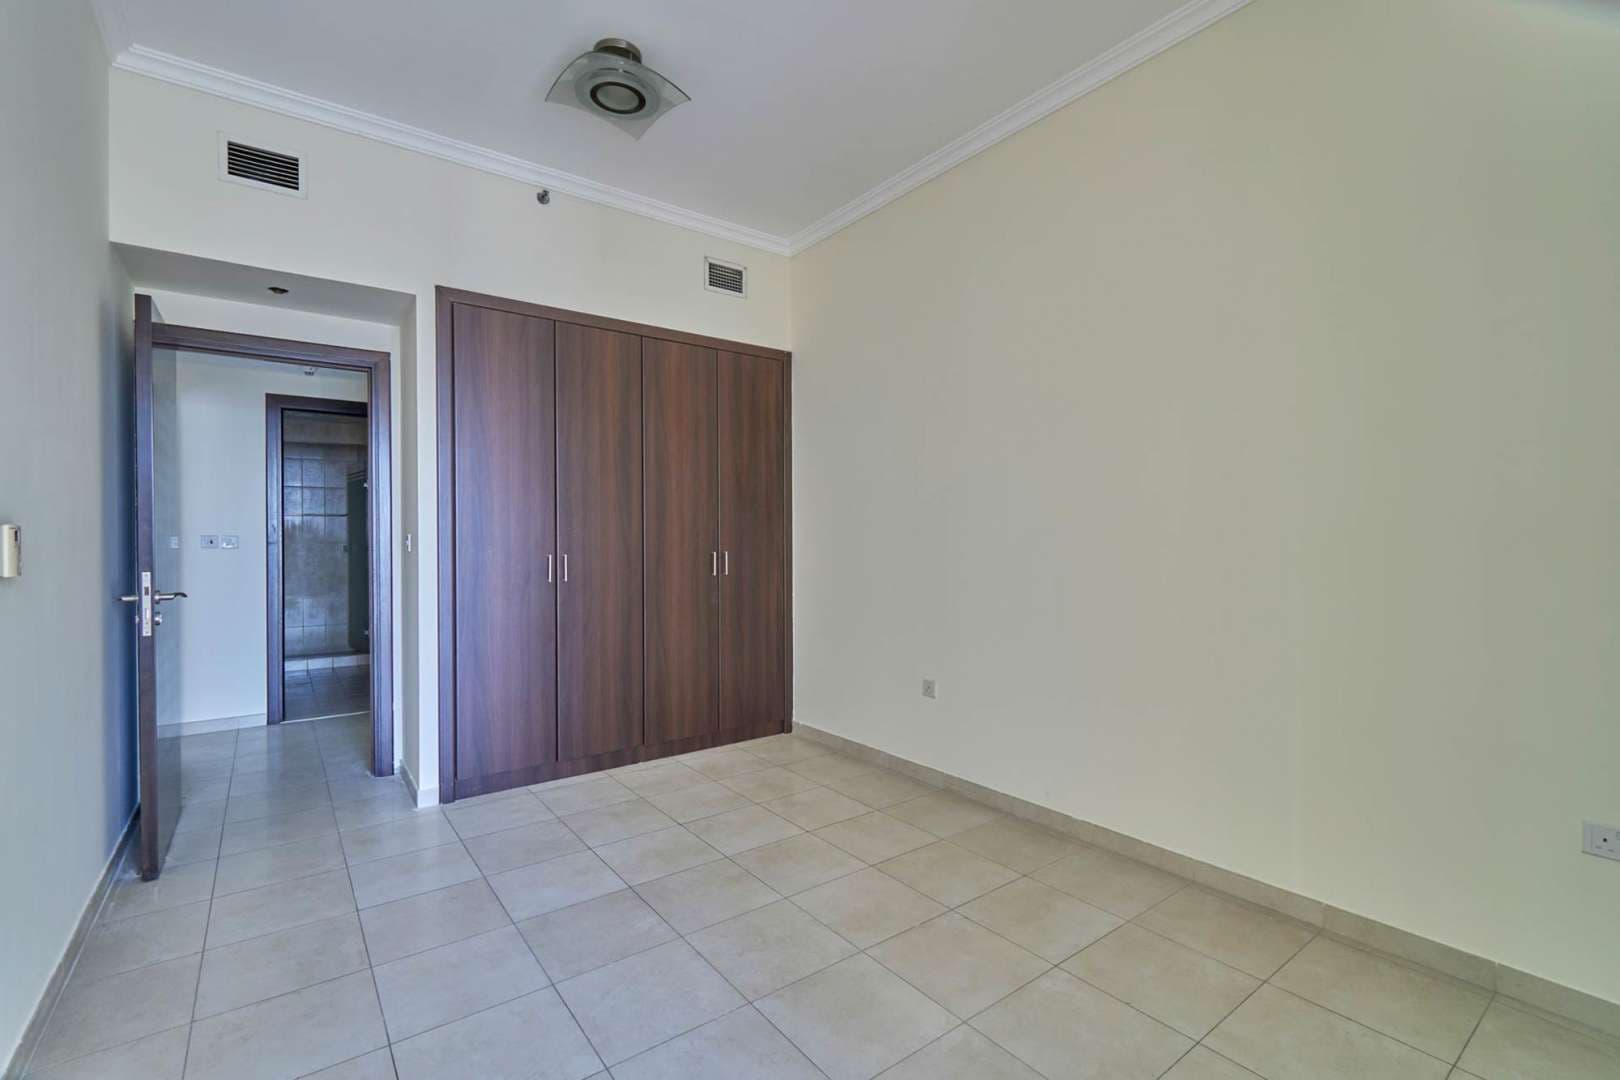 2 Bedroom Apartment For Rent Churchill Executive Tower Lp05714 166aaa8dfc213700.jpg